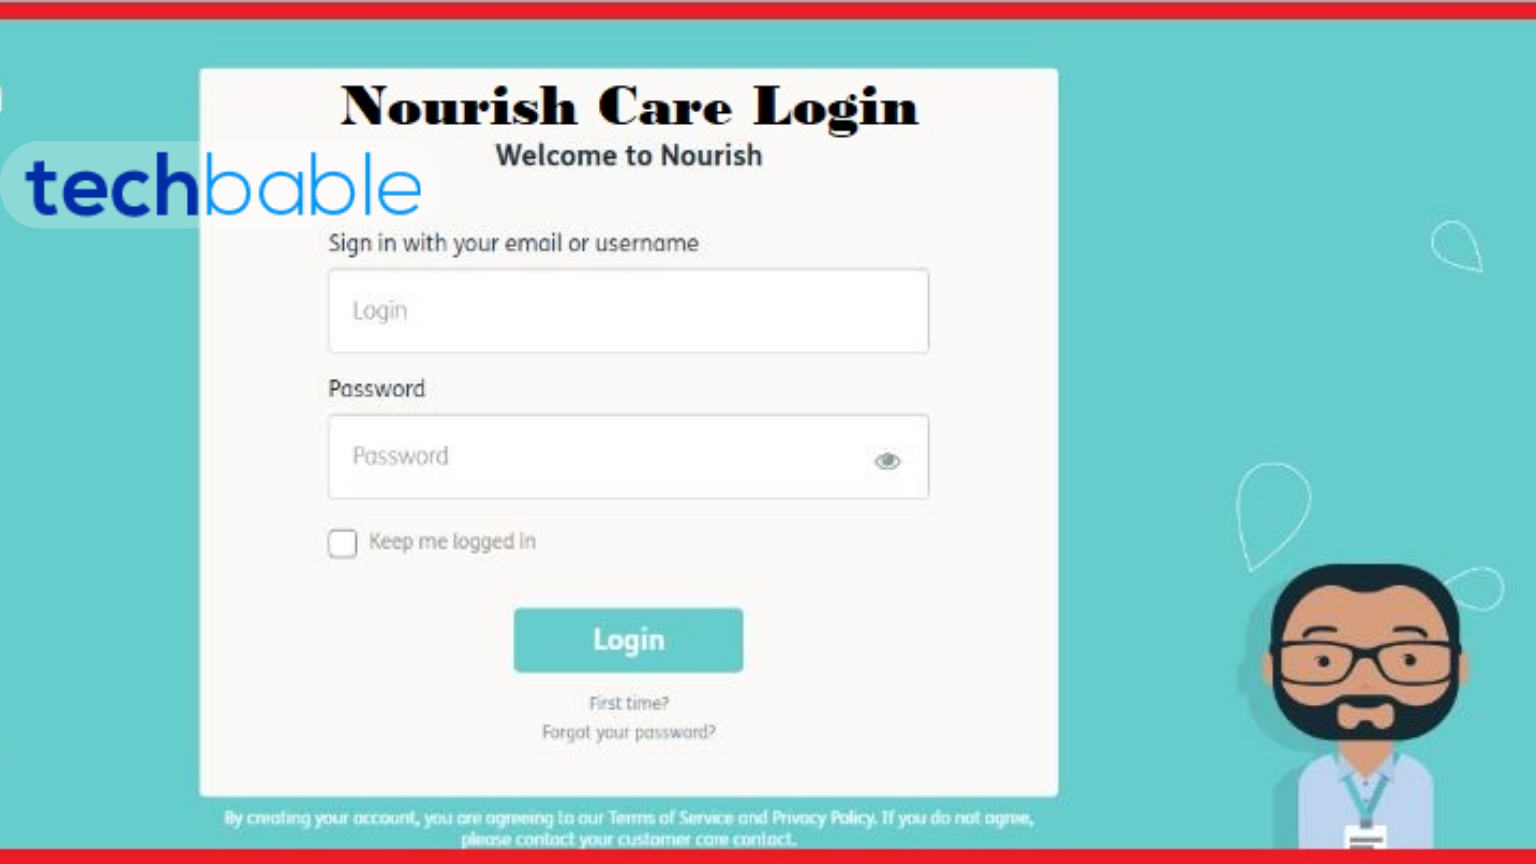 What is a Nourish care app?